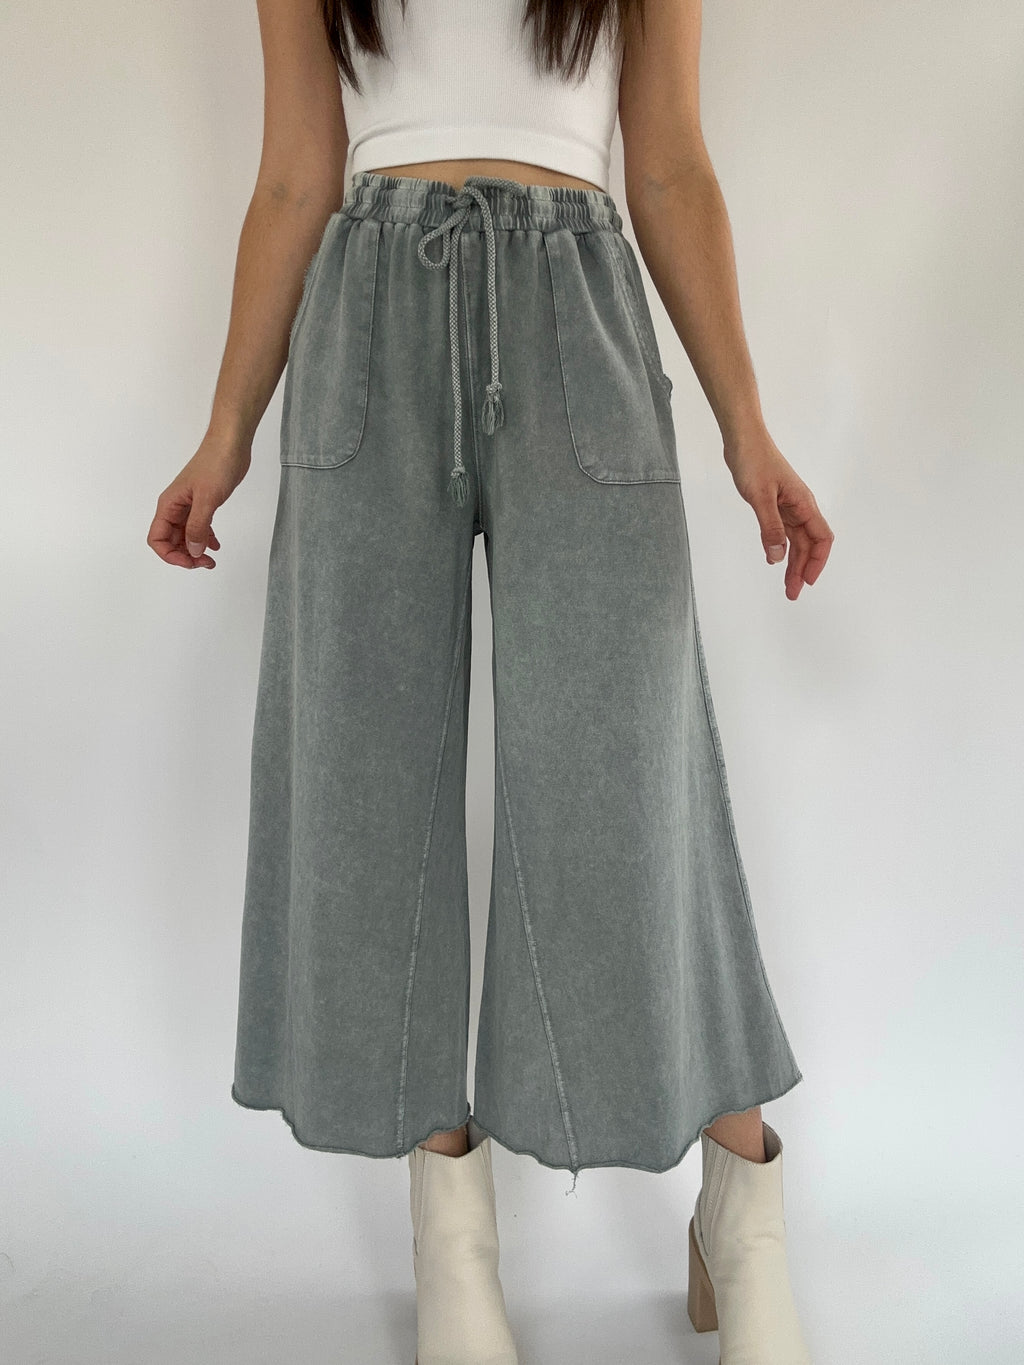 On The Road Again Pants - Faded Teal